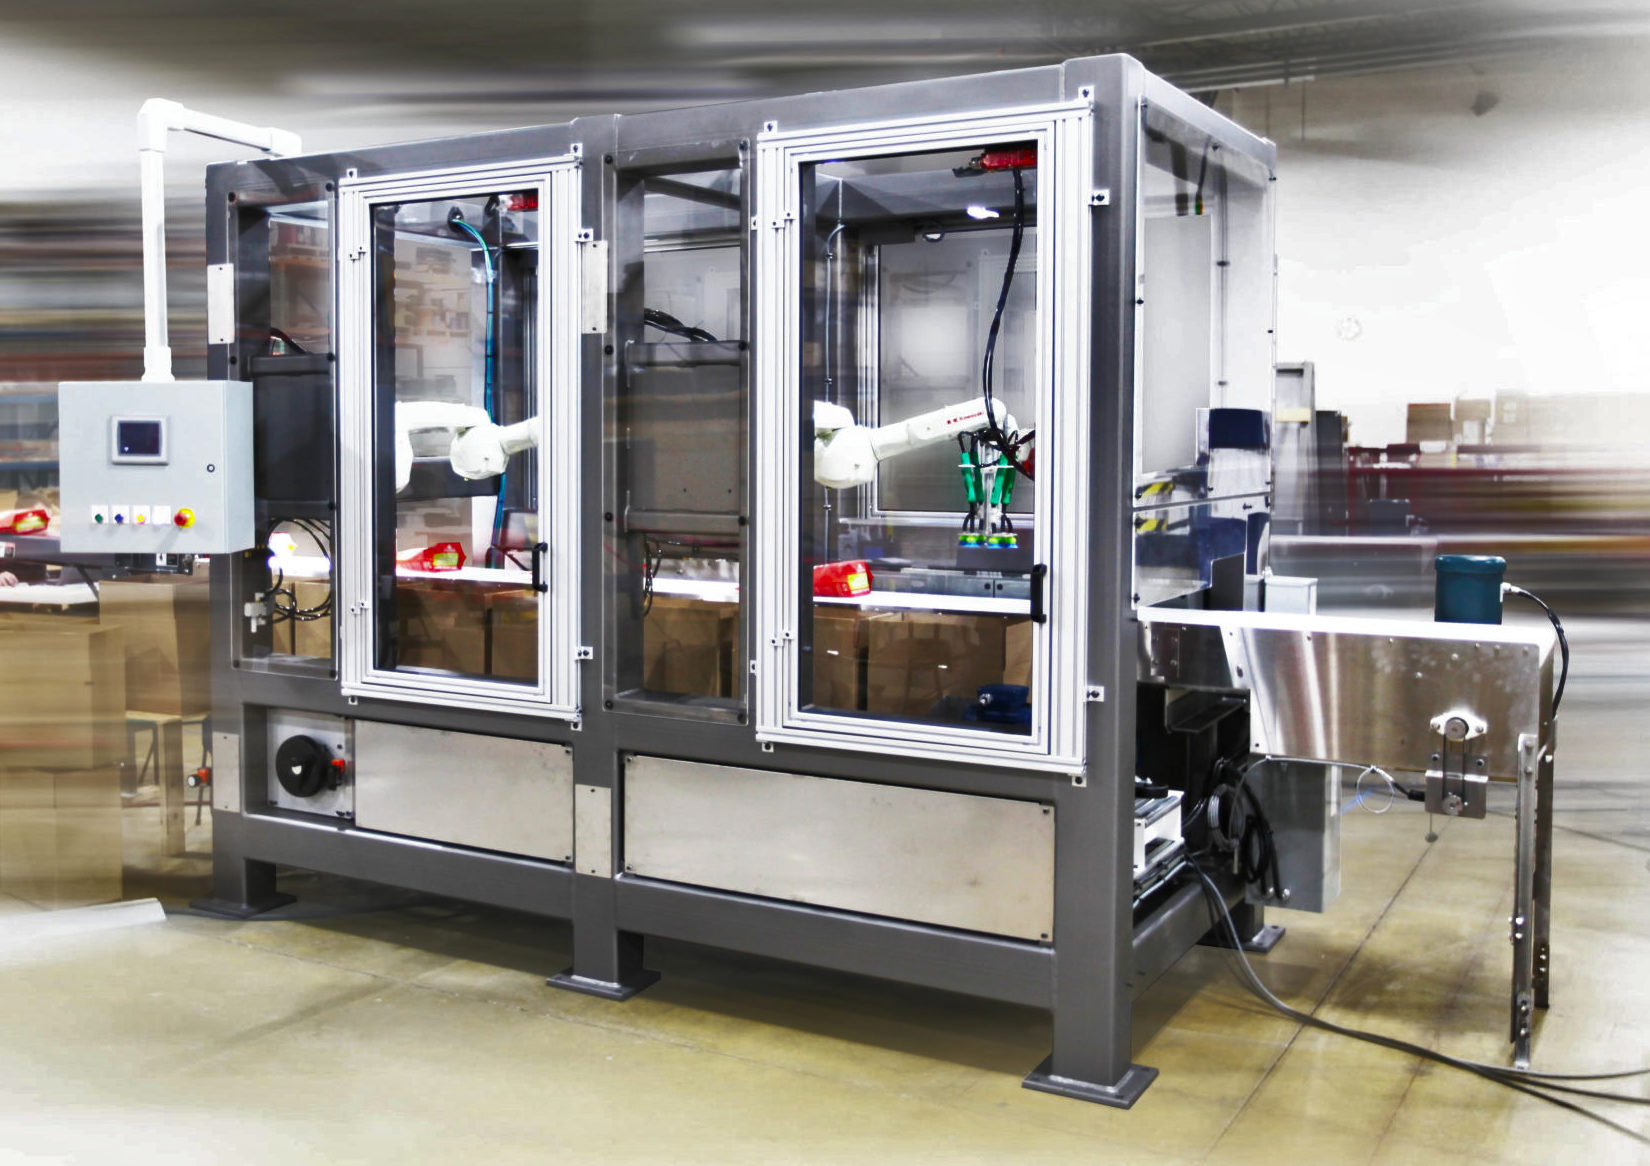 Benefits of Case Packing Systems